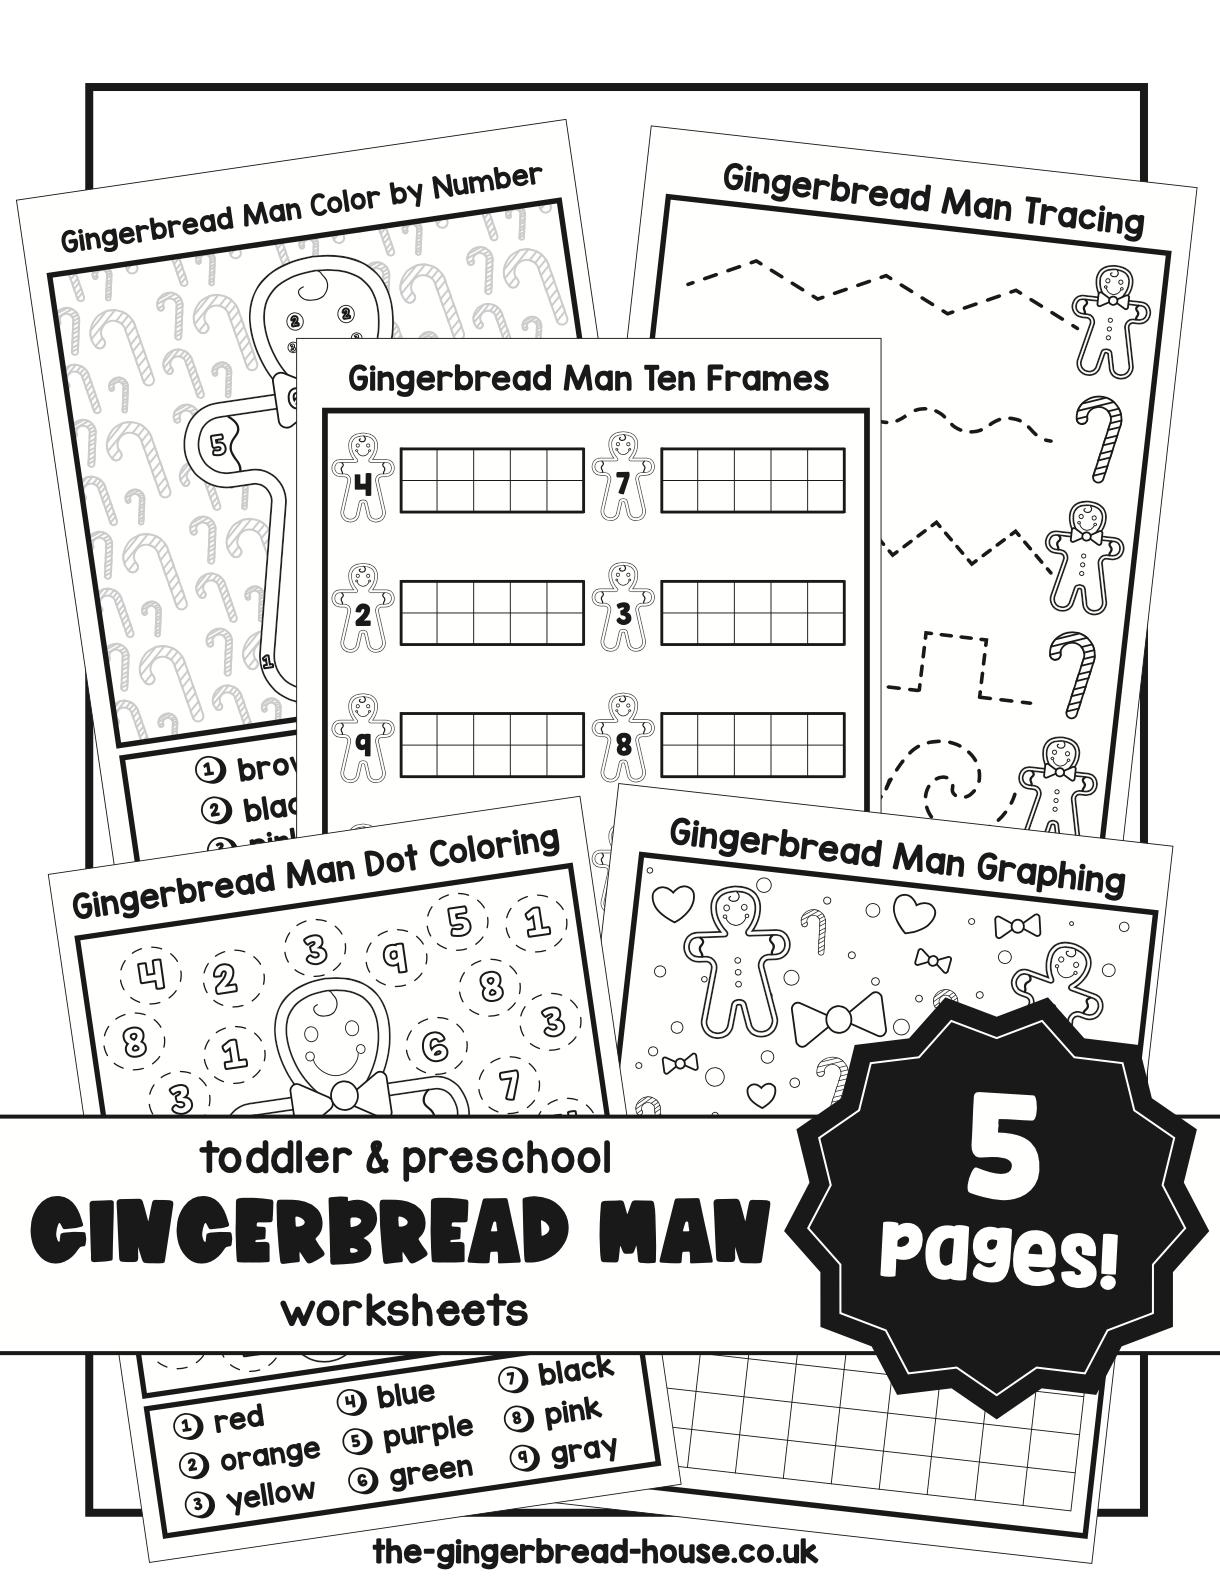 The Gingerbread Man Activity Pack For Toddlers - The-Gingerbread pertaining to Free Printable Gingerbread Man Activities